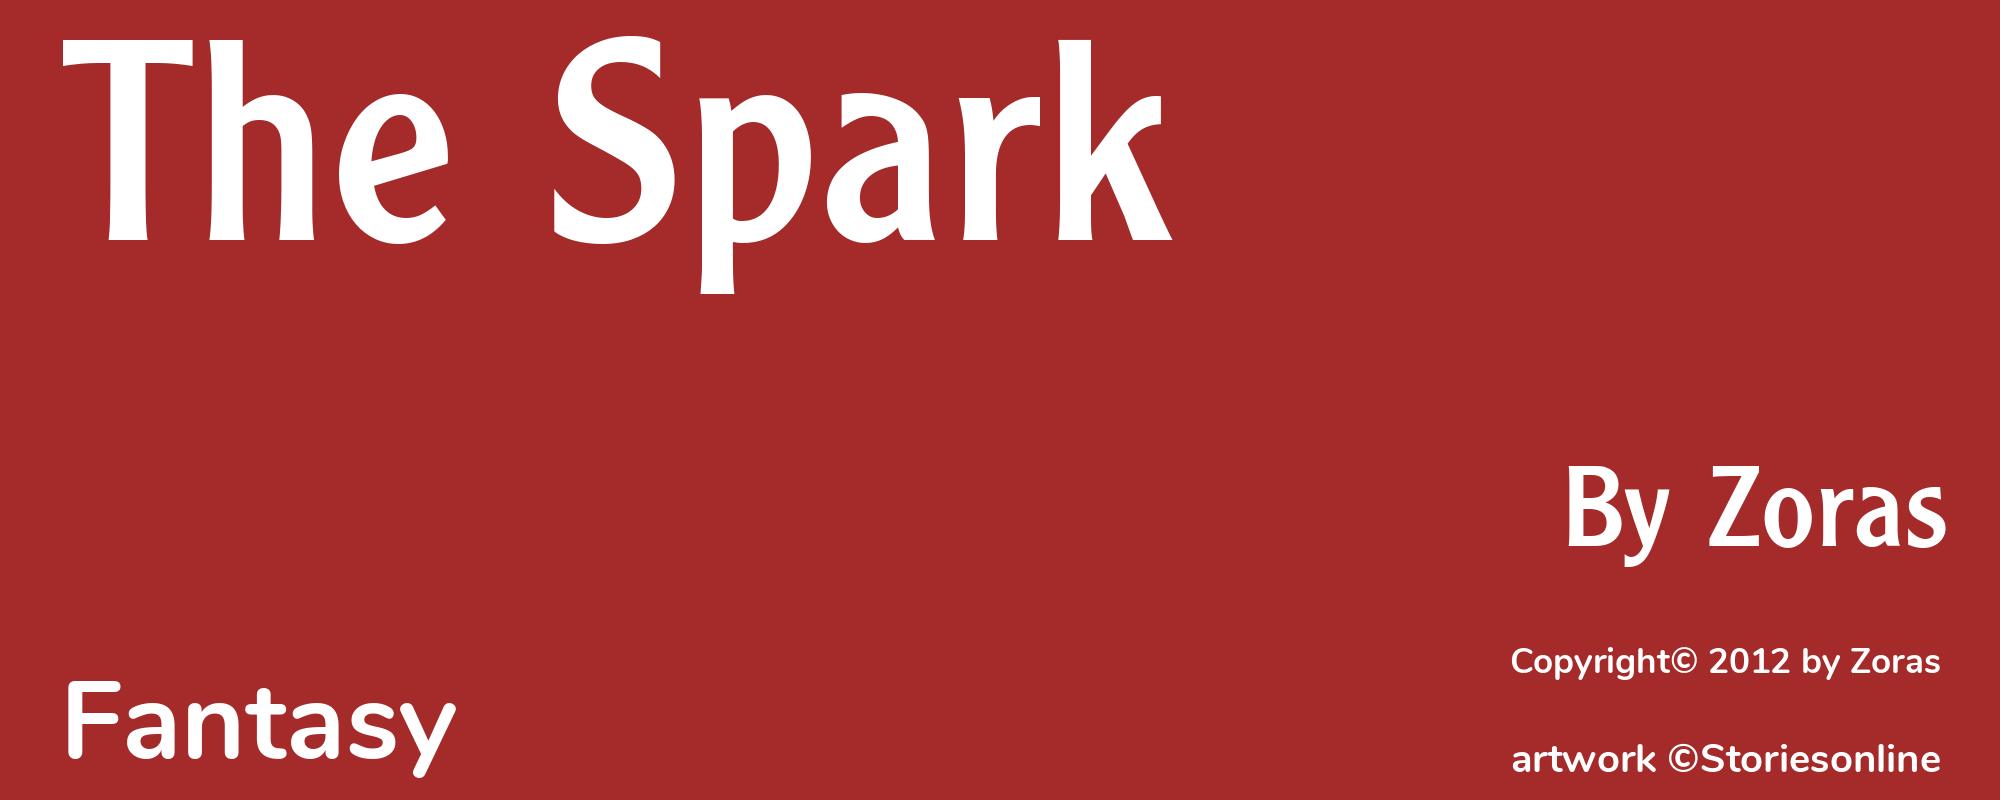 The Spark - Cover